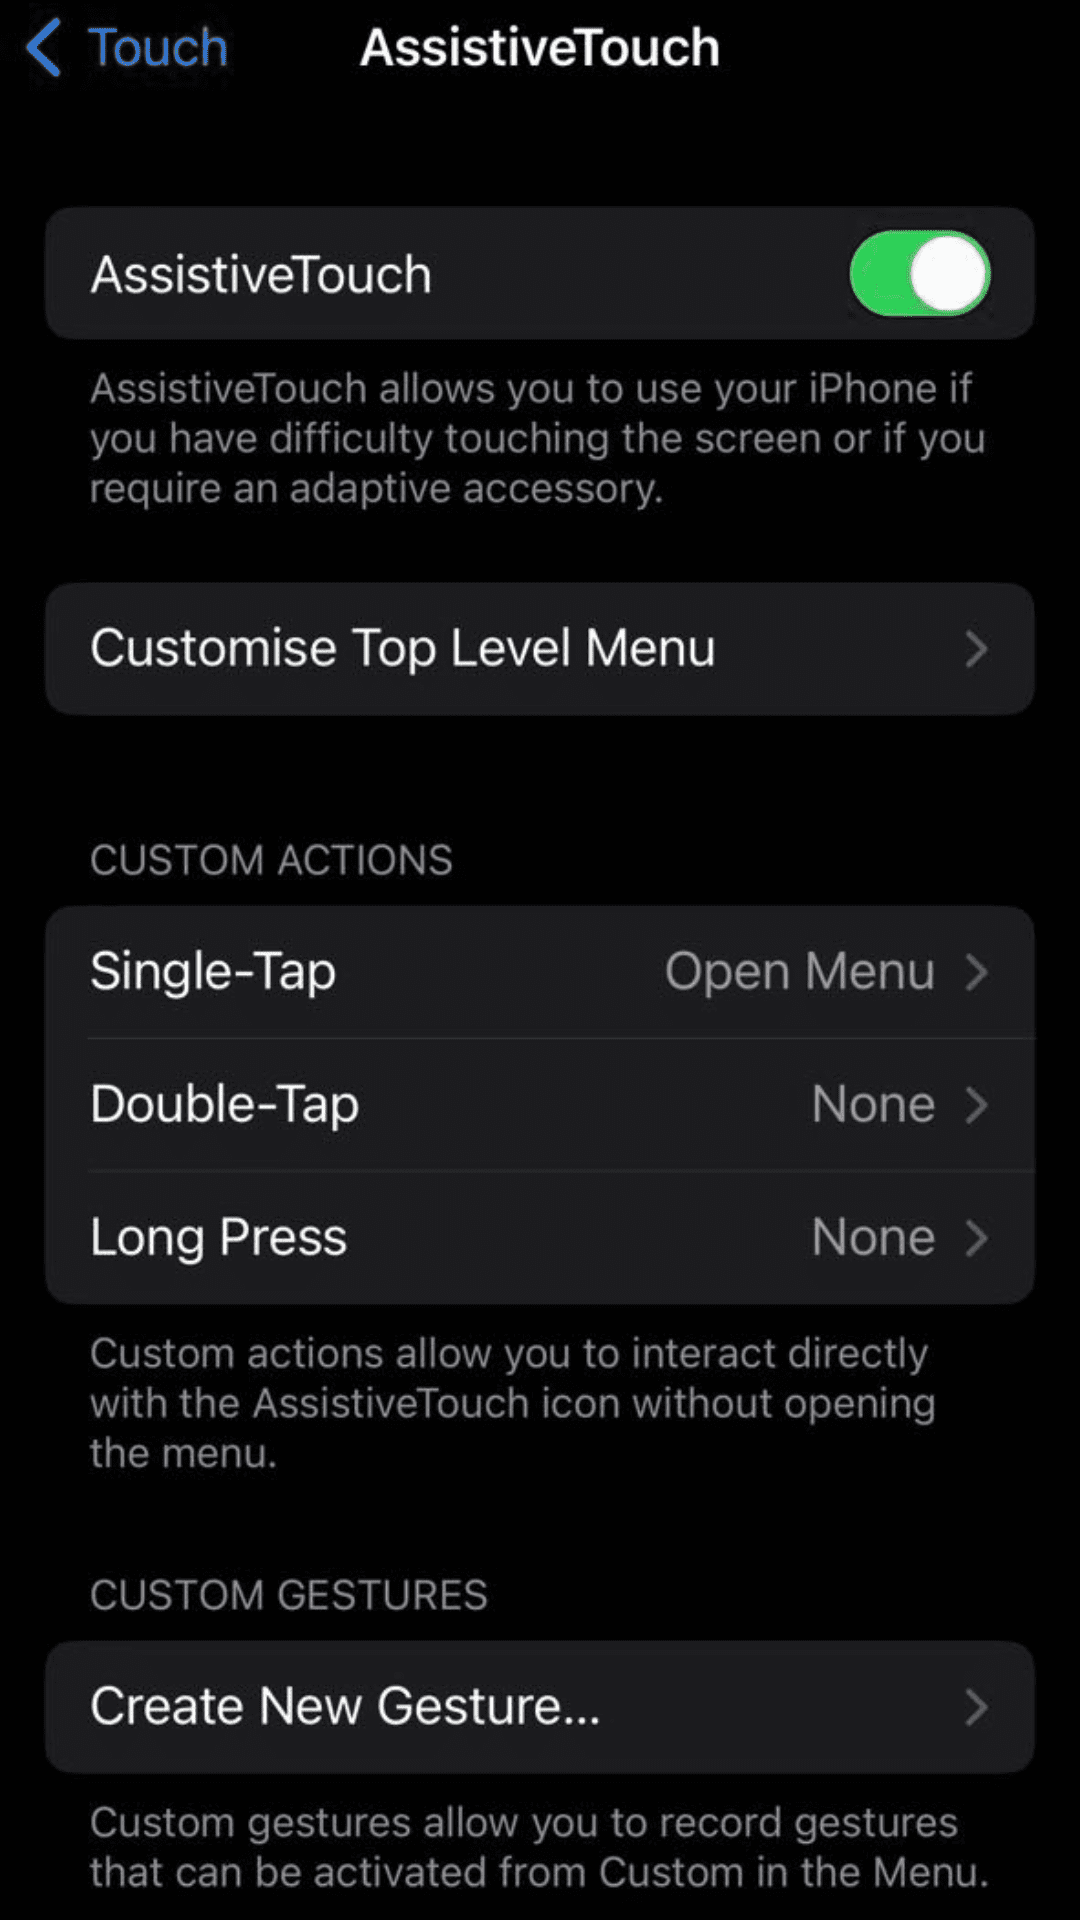 AssistiveTouch: Navigating Your iPhone with Gestures